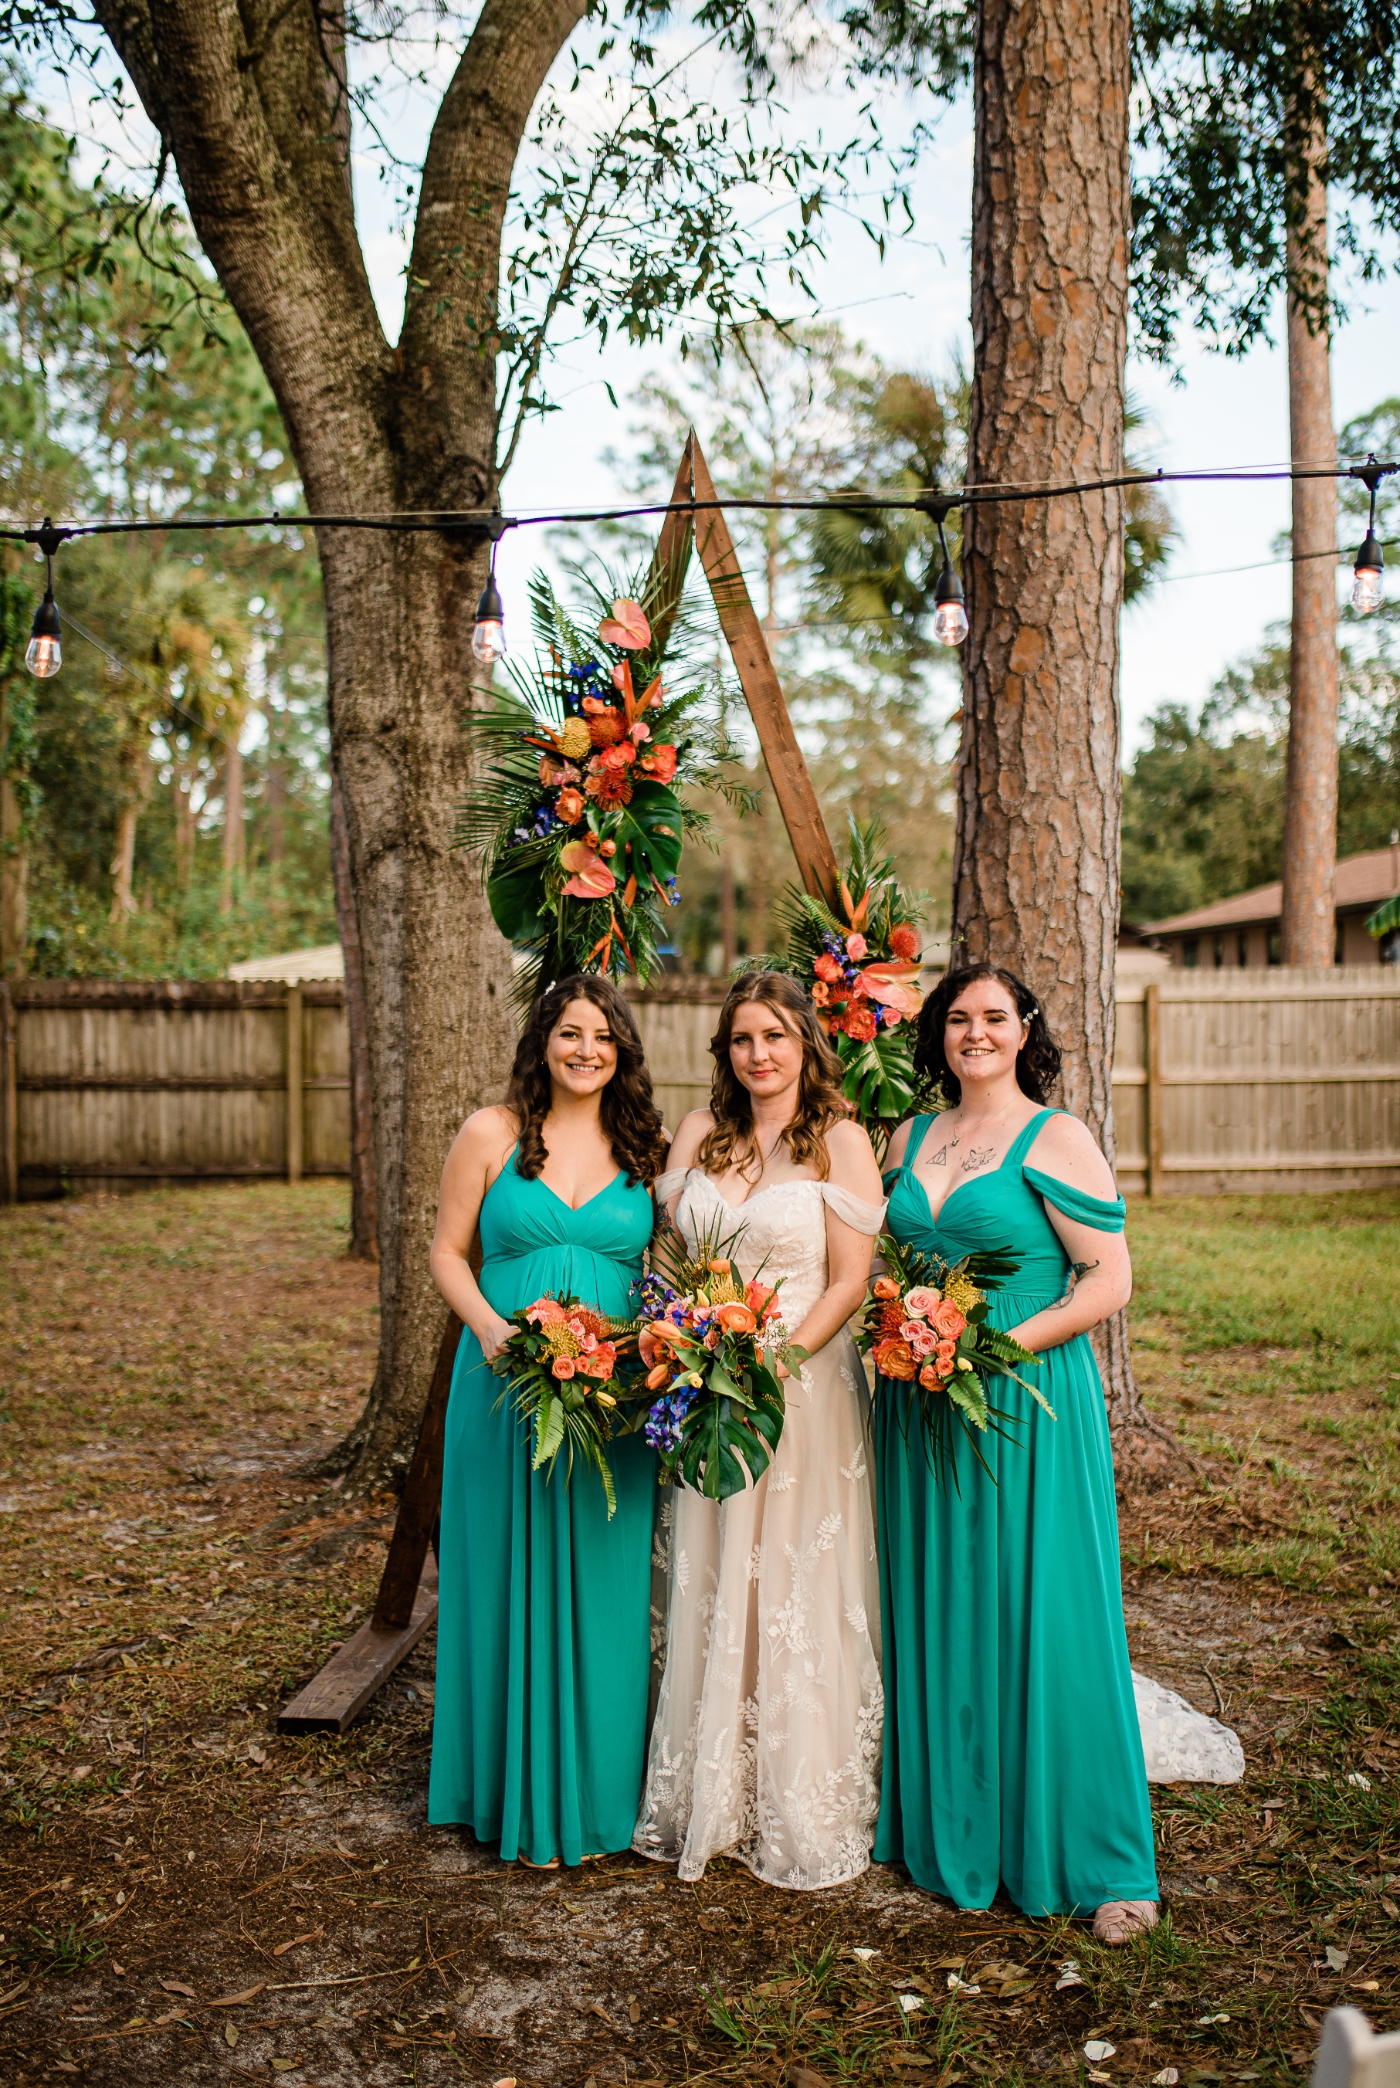 Mae and her maid of honor, Natalie, and her bridesmaid Sarah